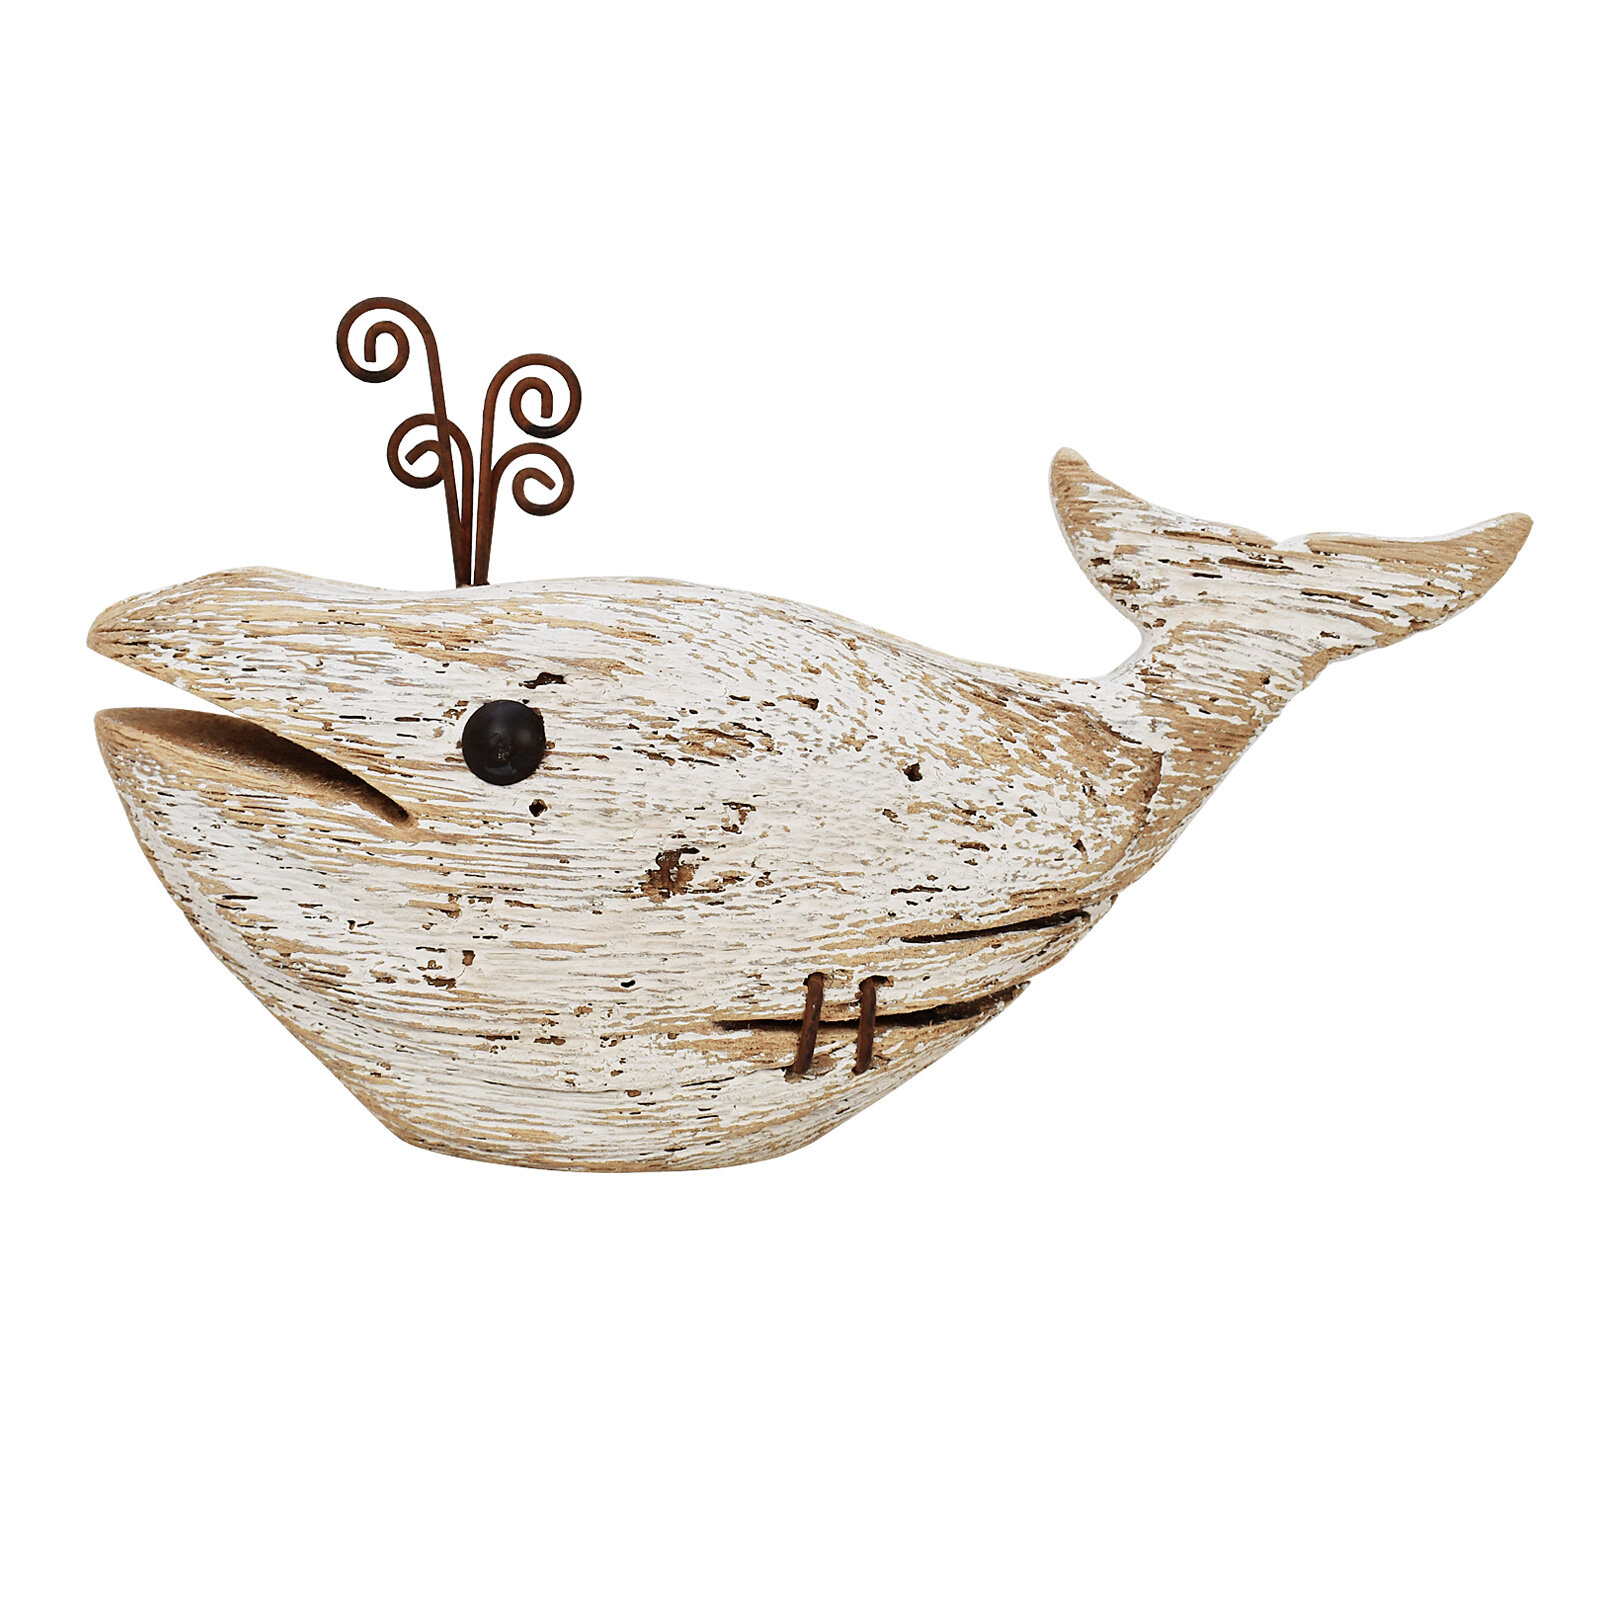 Highland Dunes Wood Whale Statue Nautical Tabletop Decor Rustic Whale Animal  Figurine Distressed Wooden Whale Sculpture Fun Beach Ocean Decor (1, 